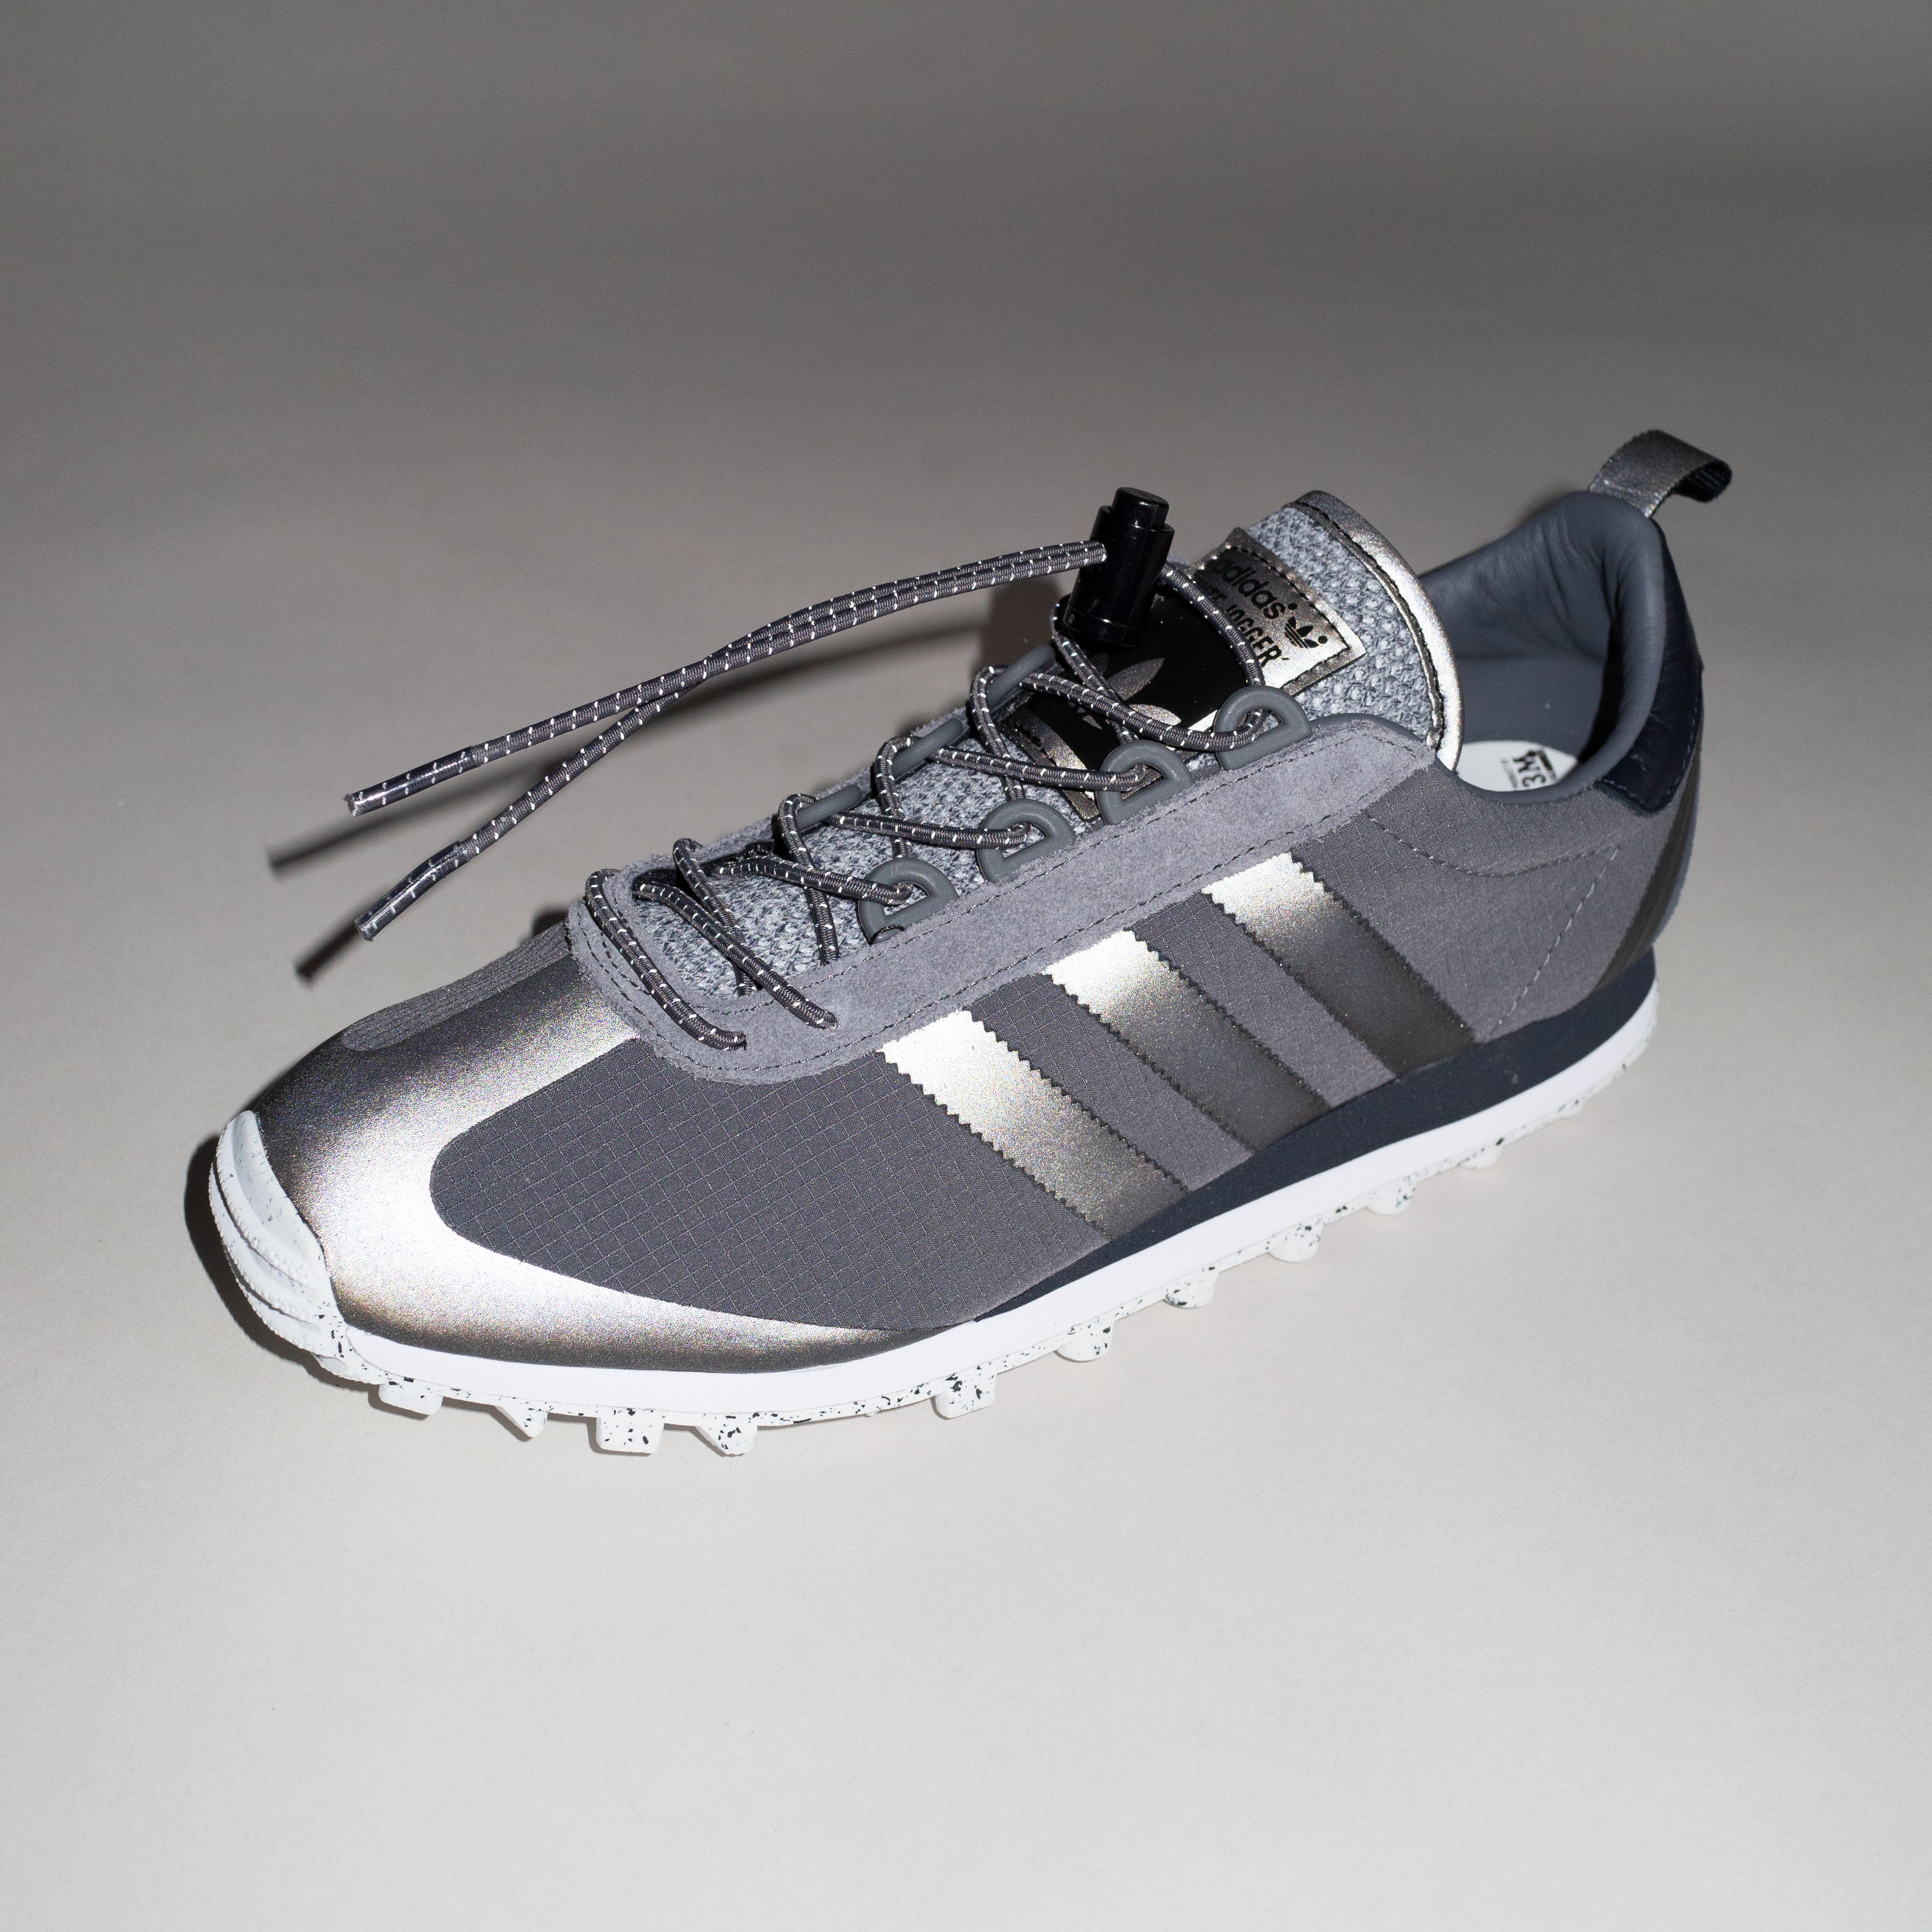 Consortium on Twitter: "adidas Originals Nite Jogger OG 3M - available with us online now https://t.co/hO347dLviv 3M Scotchlite reflective details on an '80s runner. The streamlined shape and nylon ripstop upper